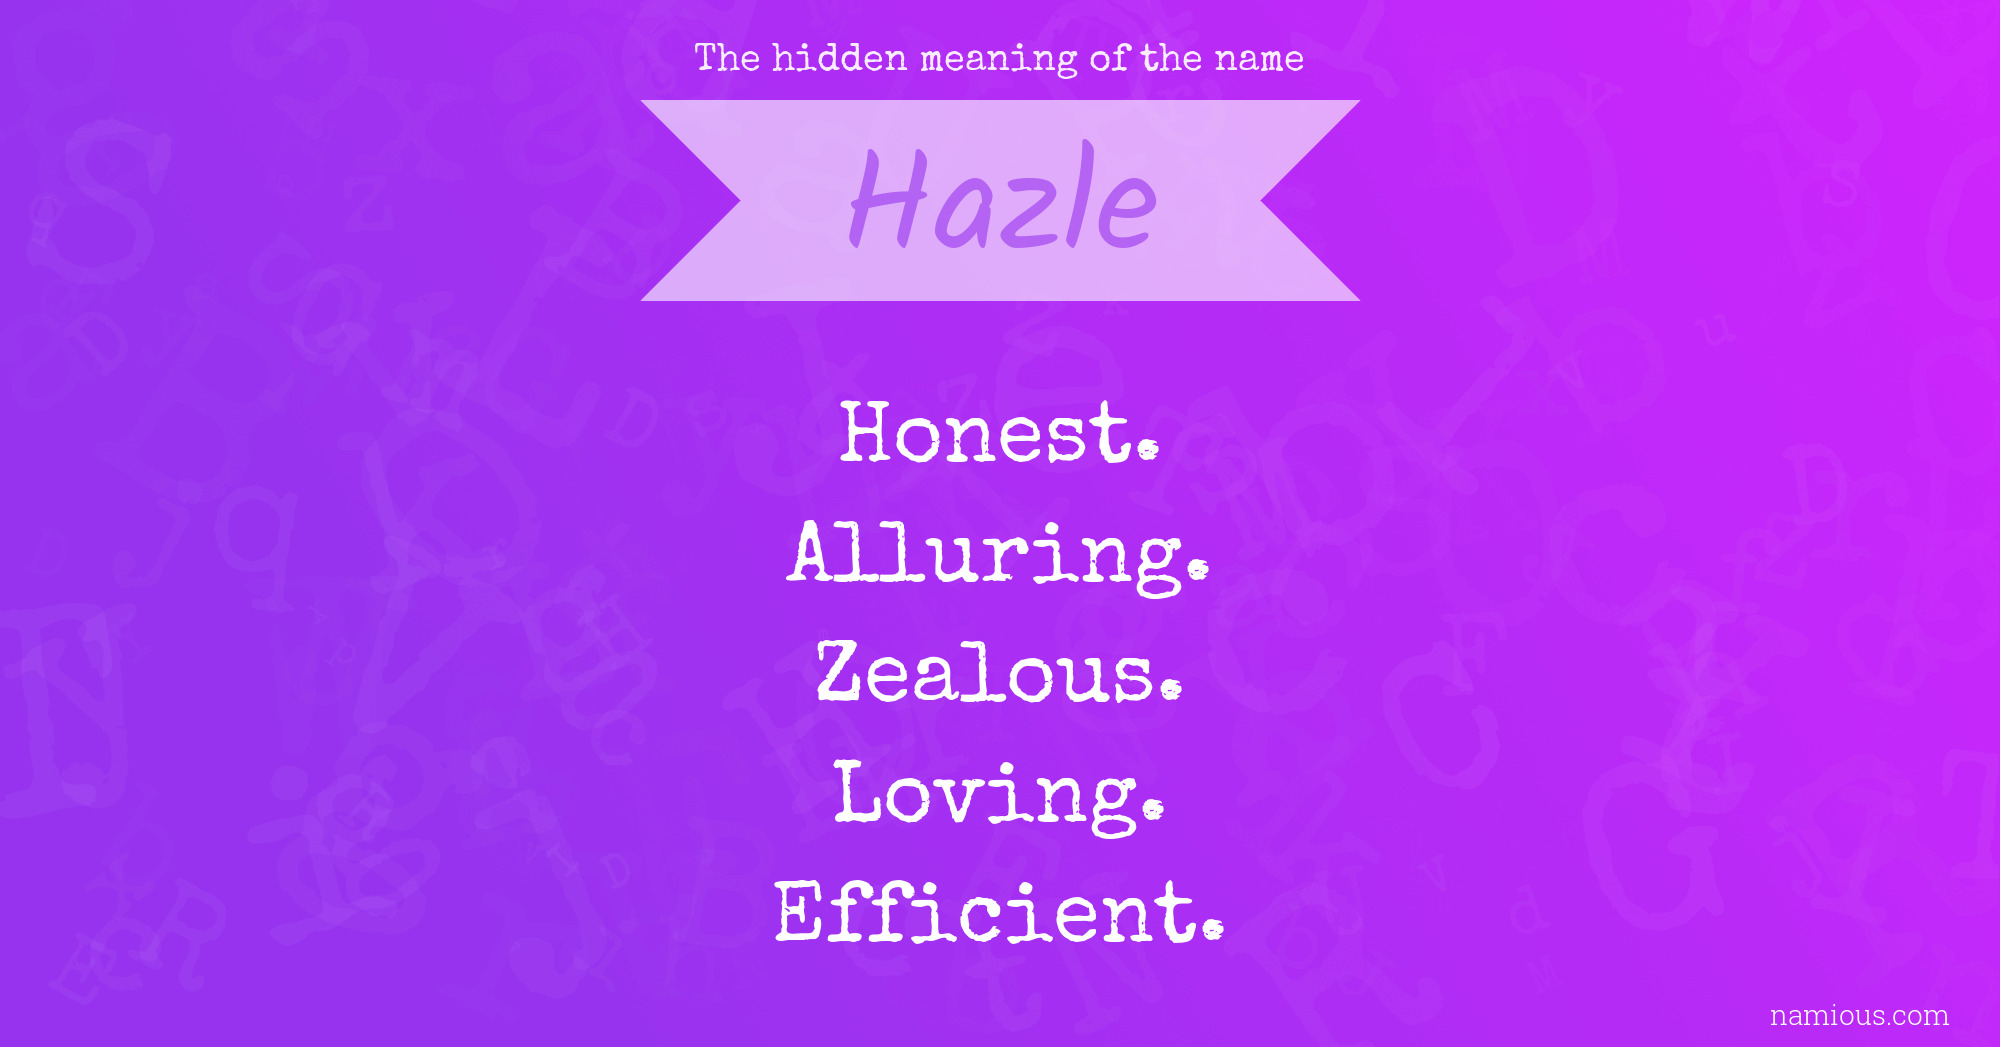 The hidden meaning of the name Hazle